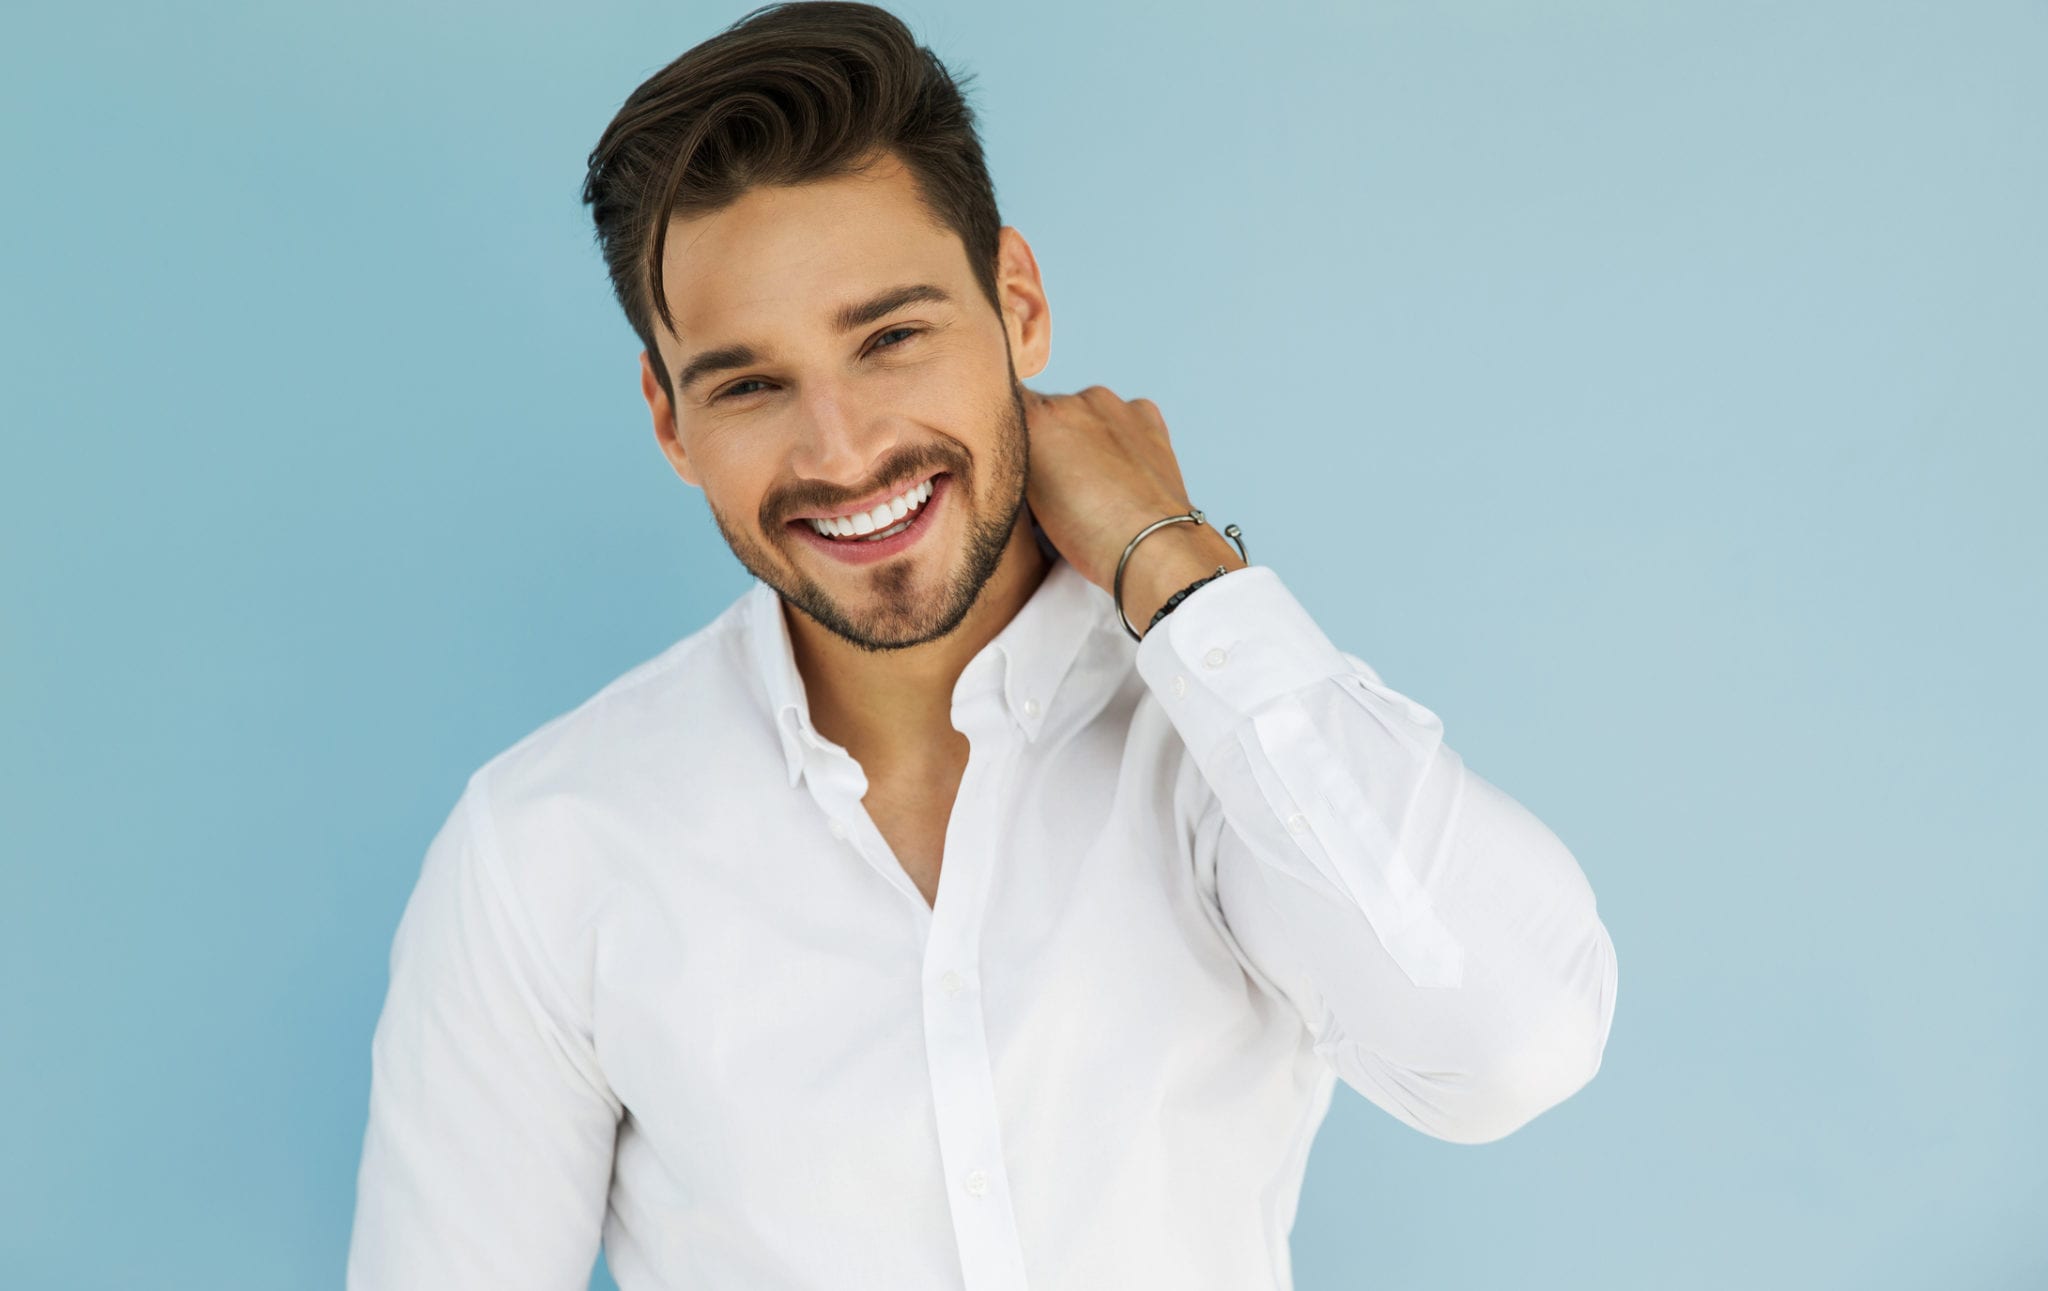 handsome young man smiling at the camera against a blue background